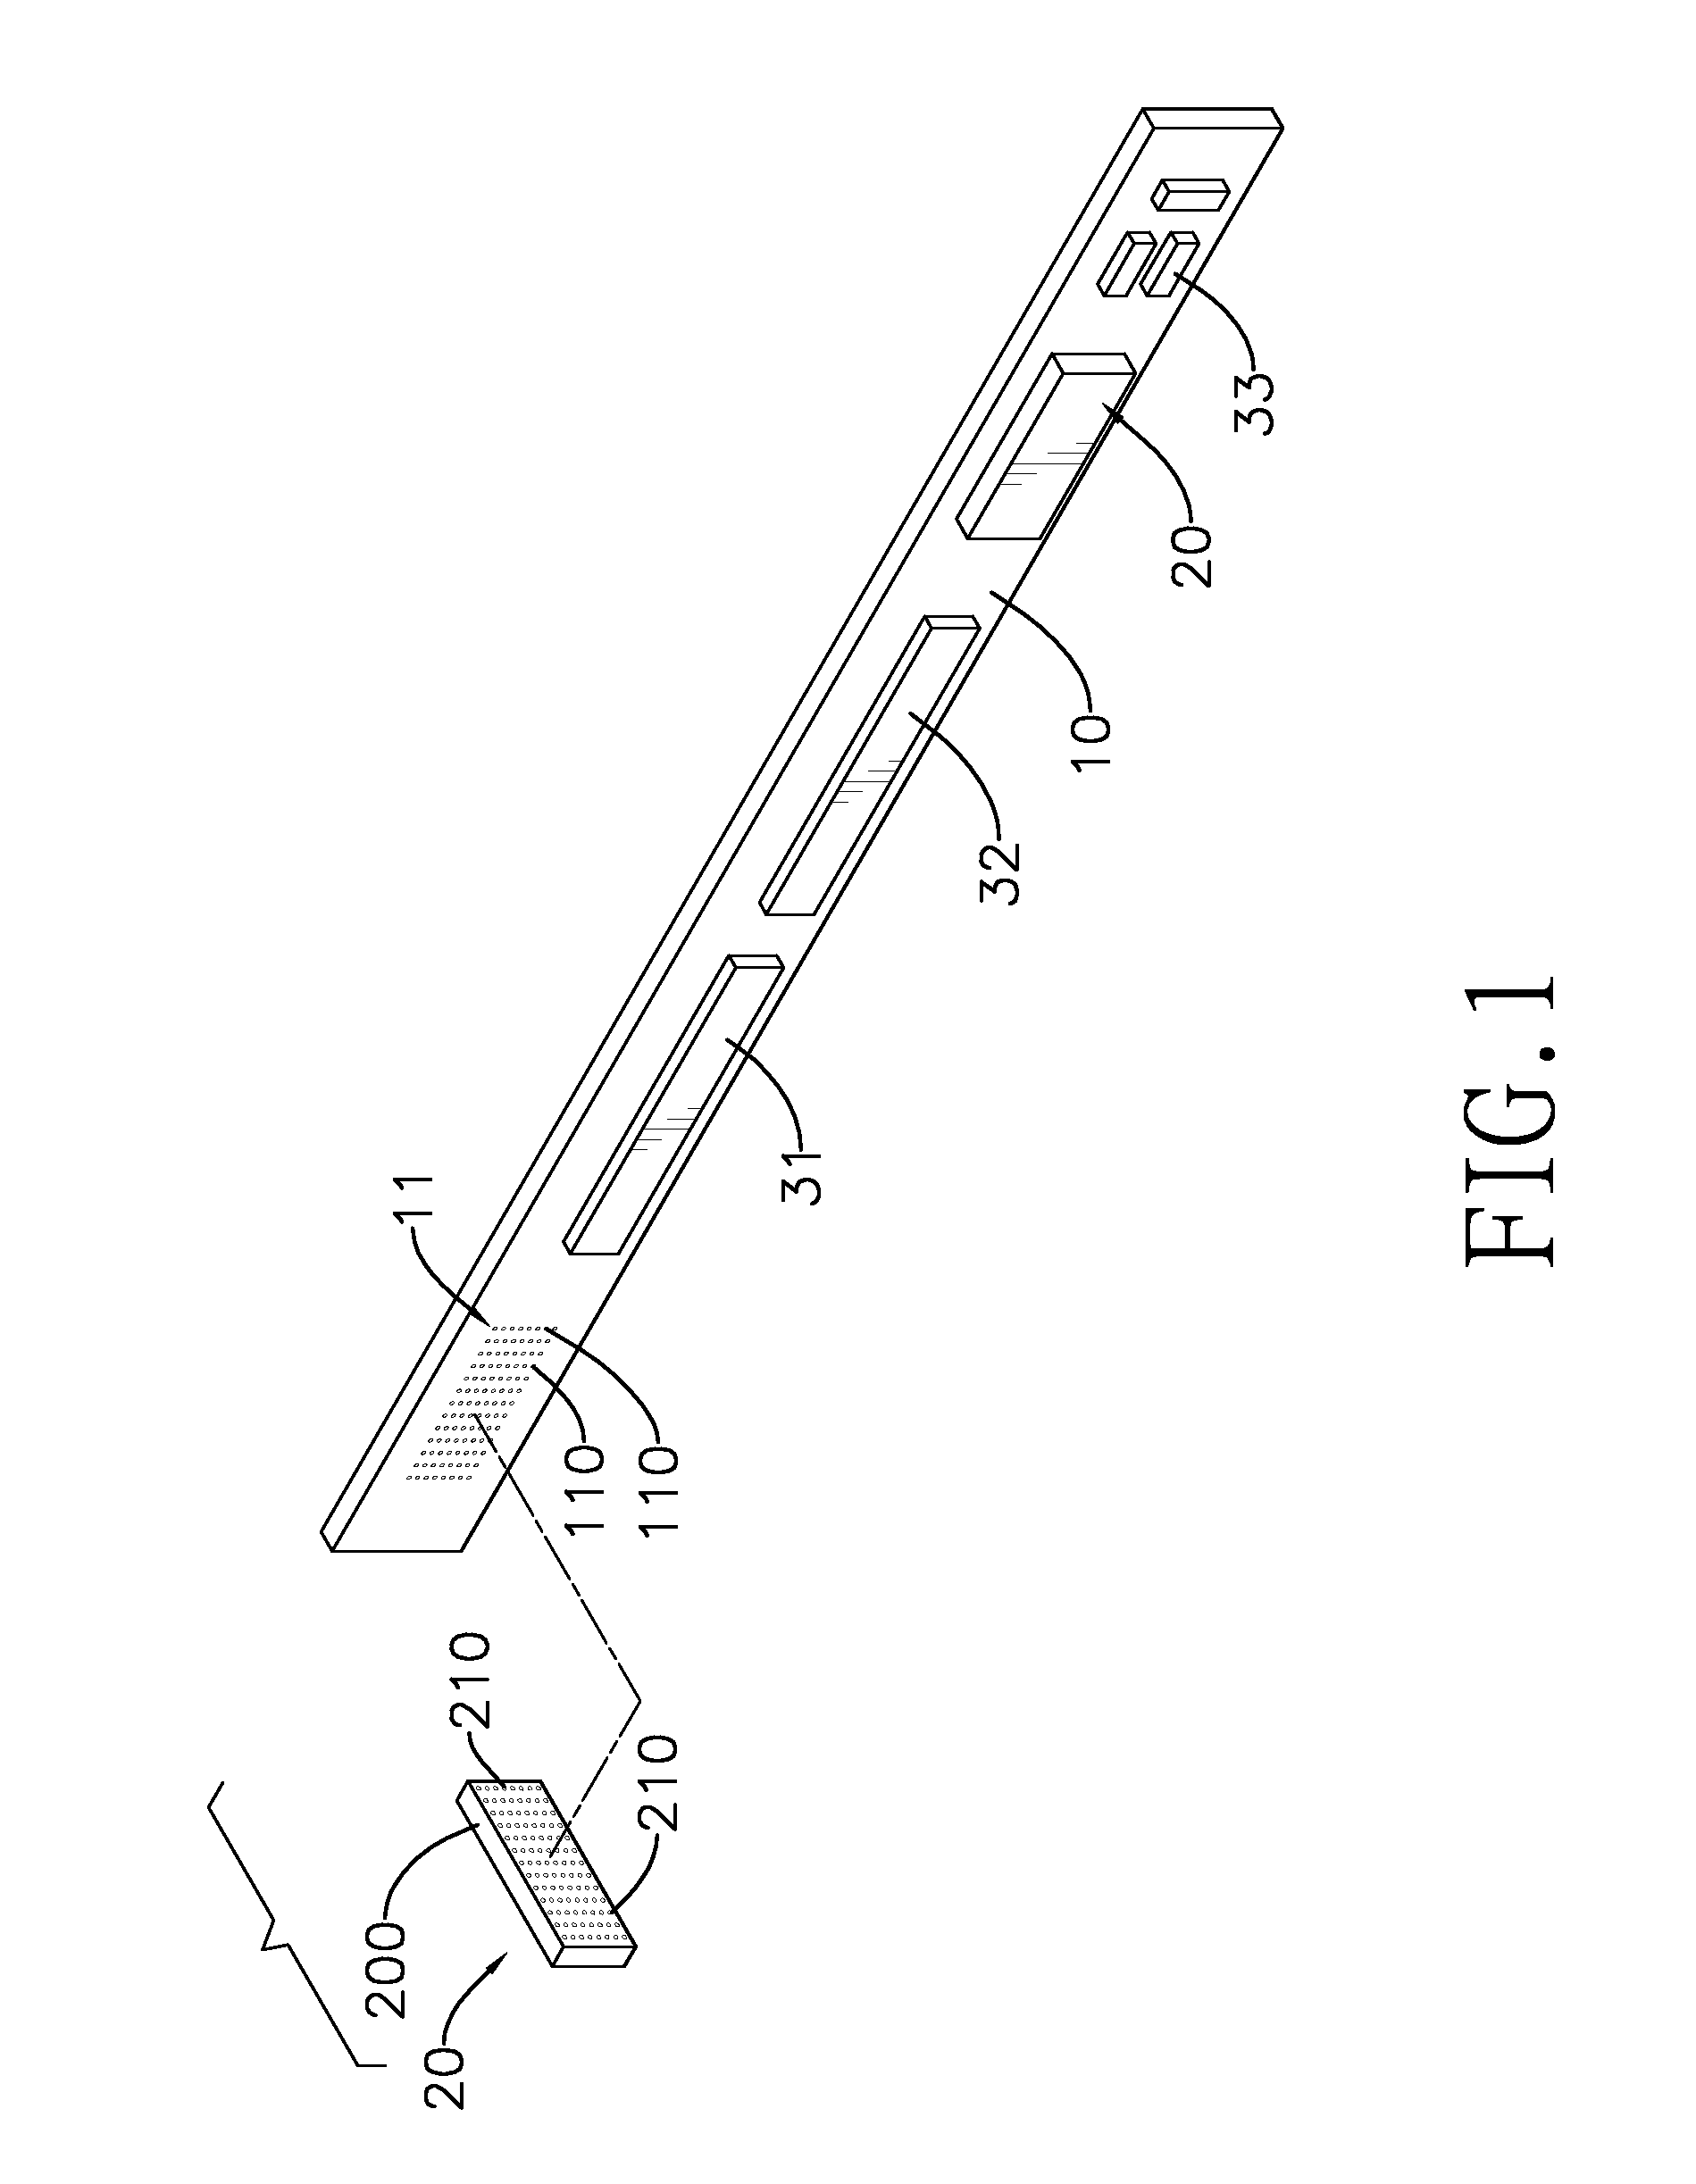 Screen control module of a mobile electronic device and controller thereof with multiple dielectric layers